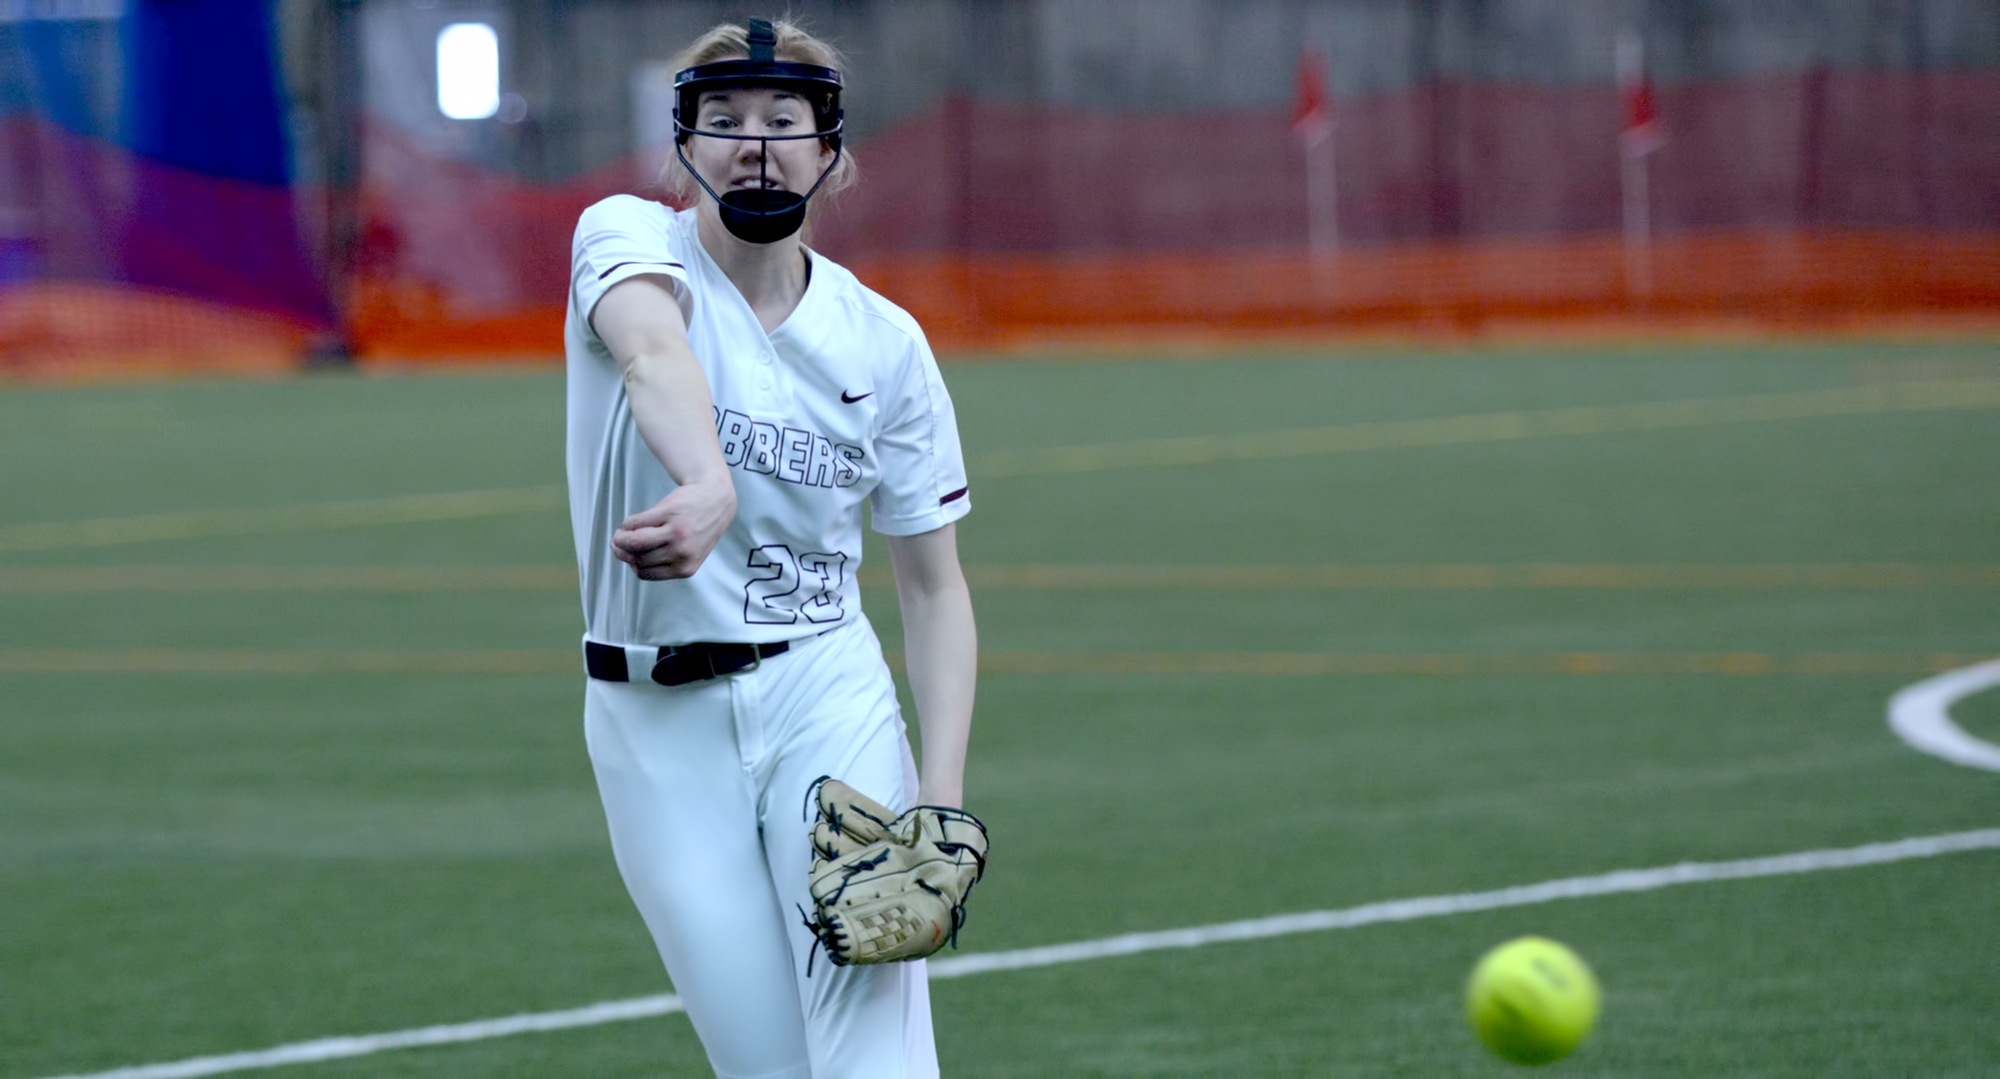 Freshman Megan Gavin continued her recent string of solid outings as she only allowed two runs and struck out three in her MIAC debut against Macalester.